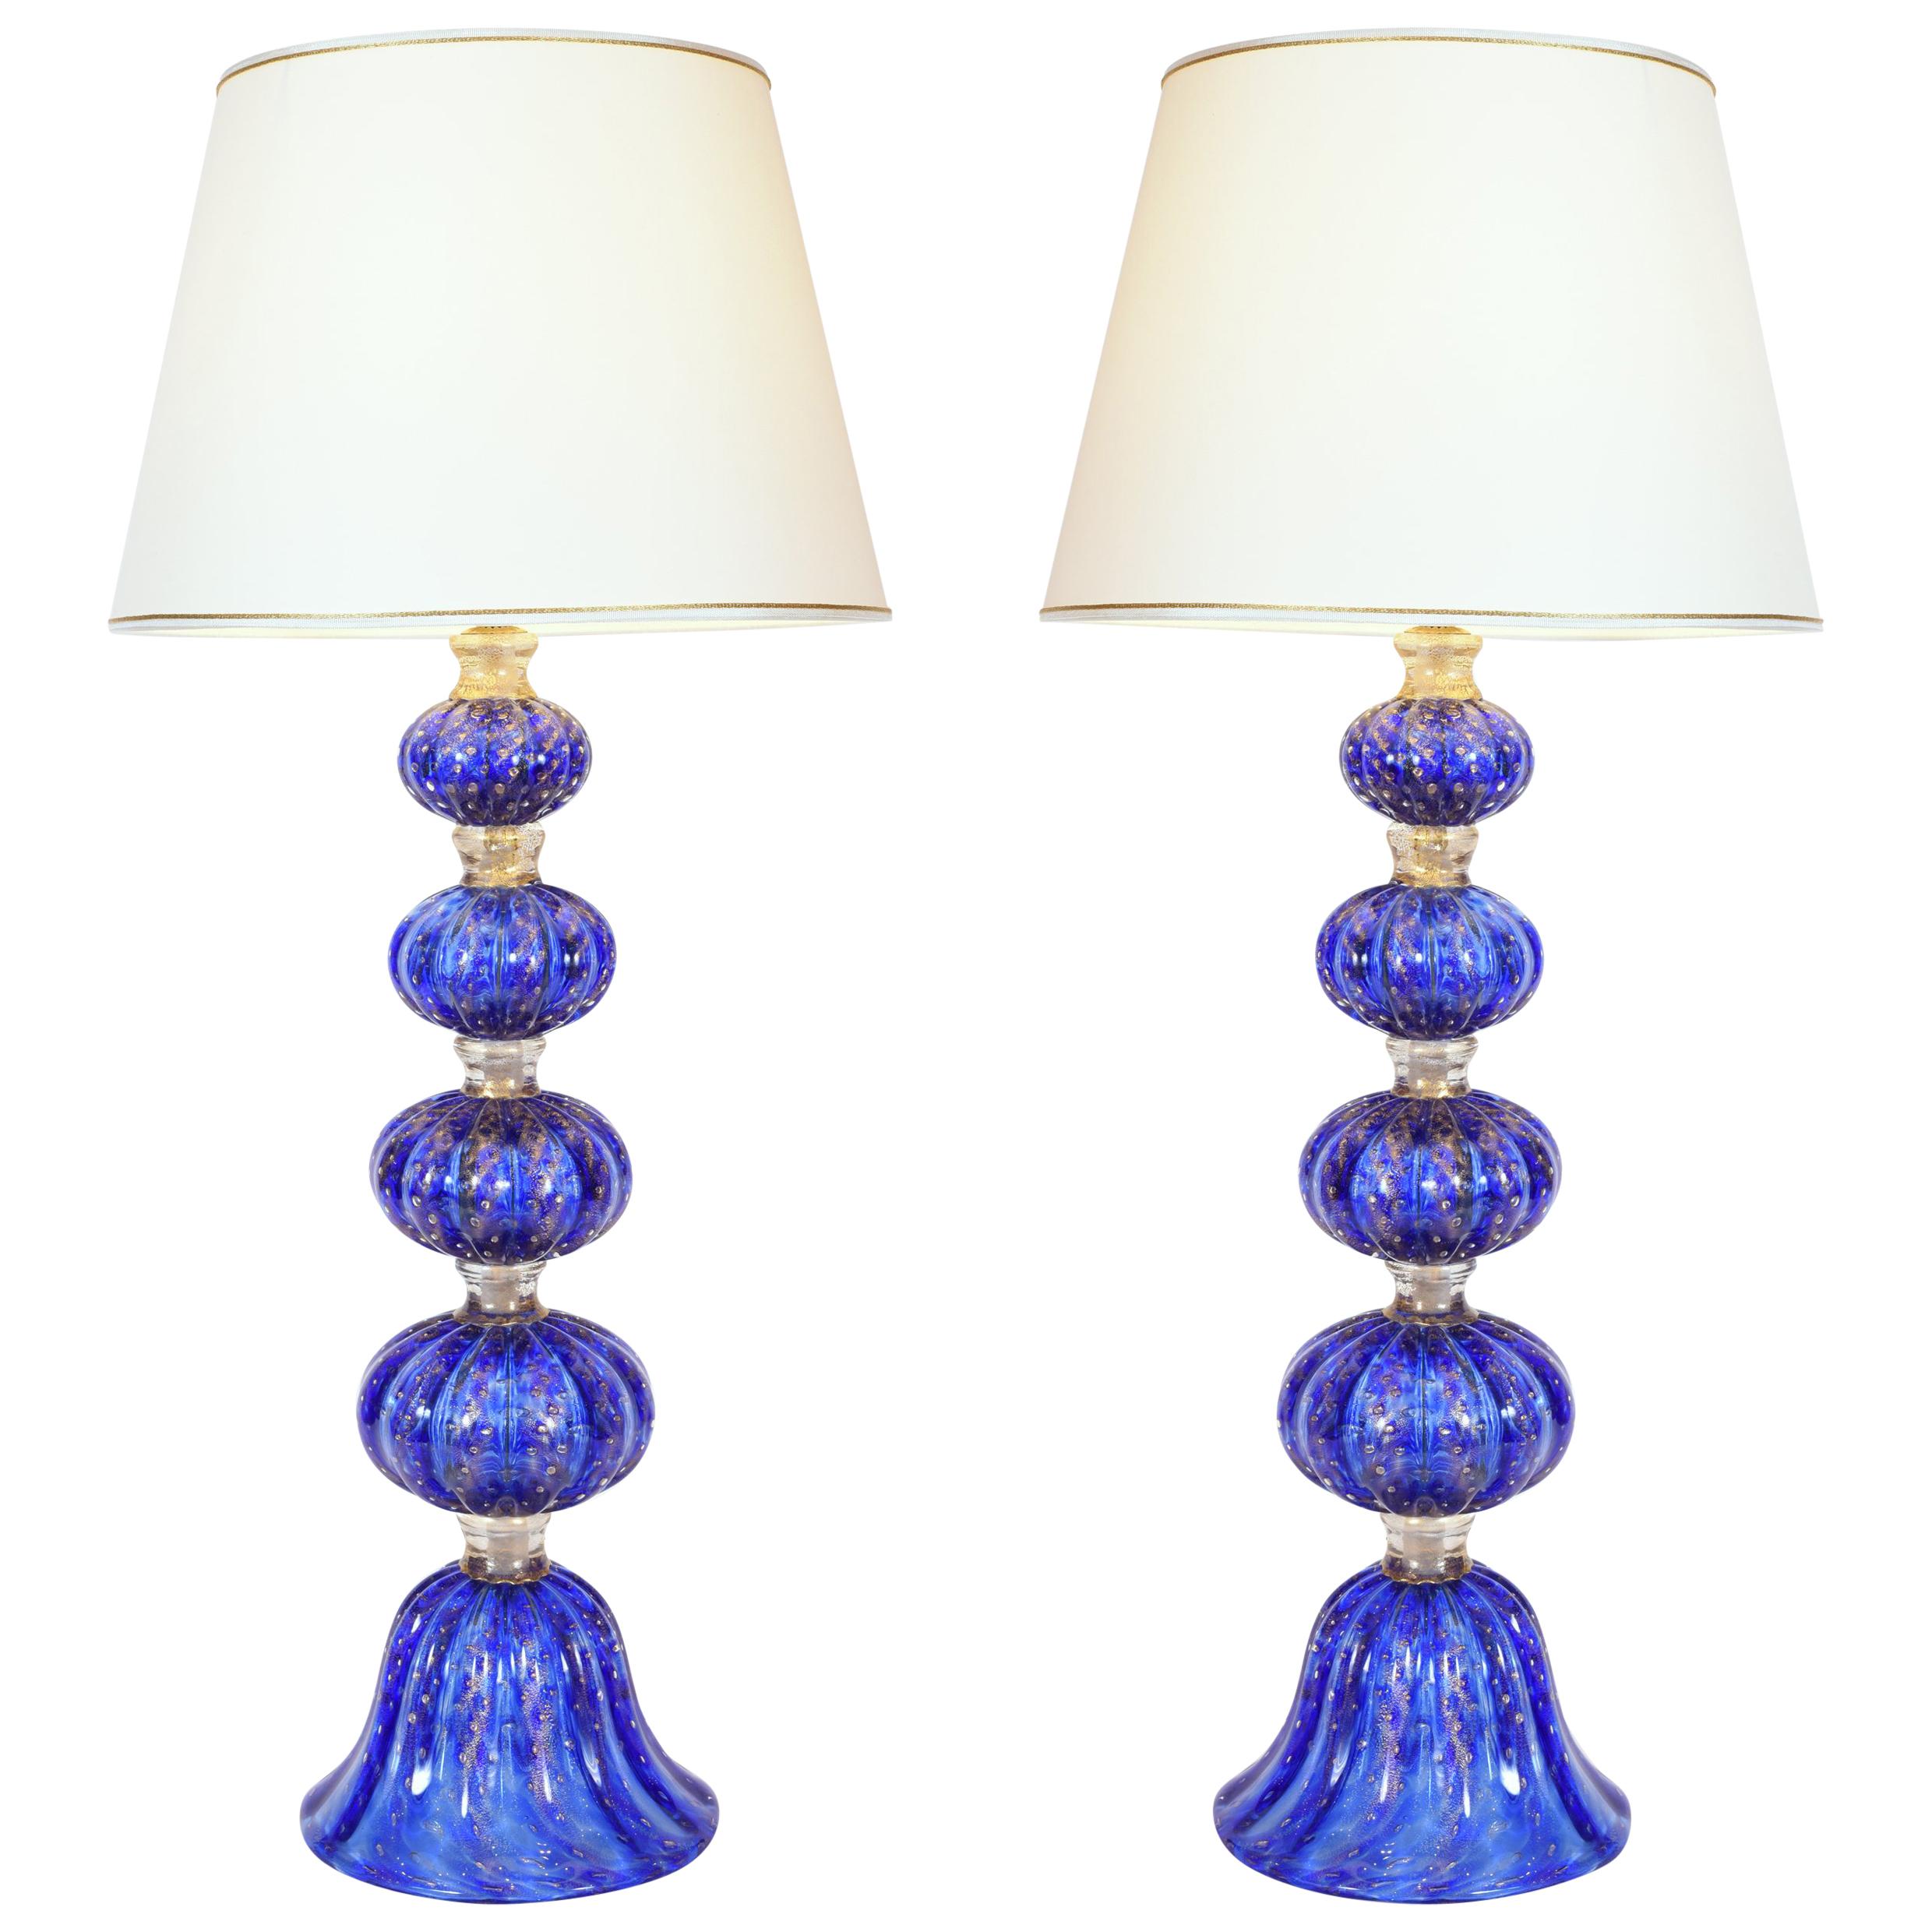 Exquisite Pair of Cobalt Blue with Gold Flecks Table Lamps